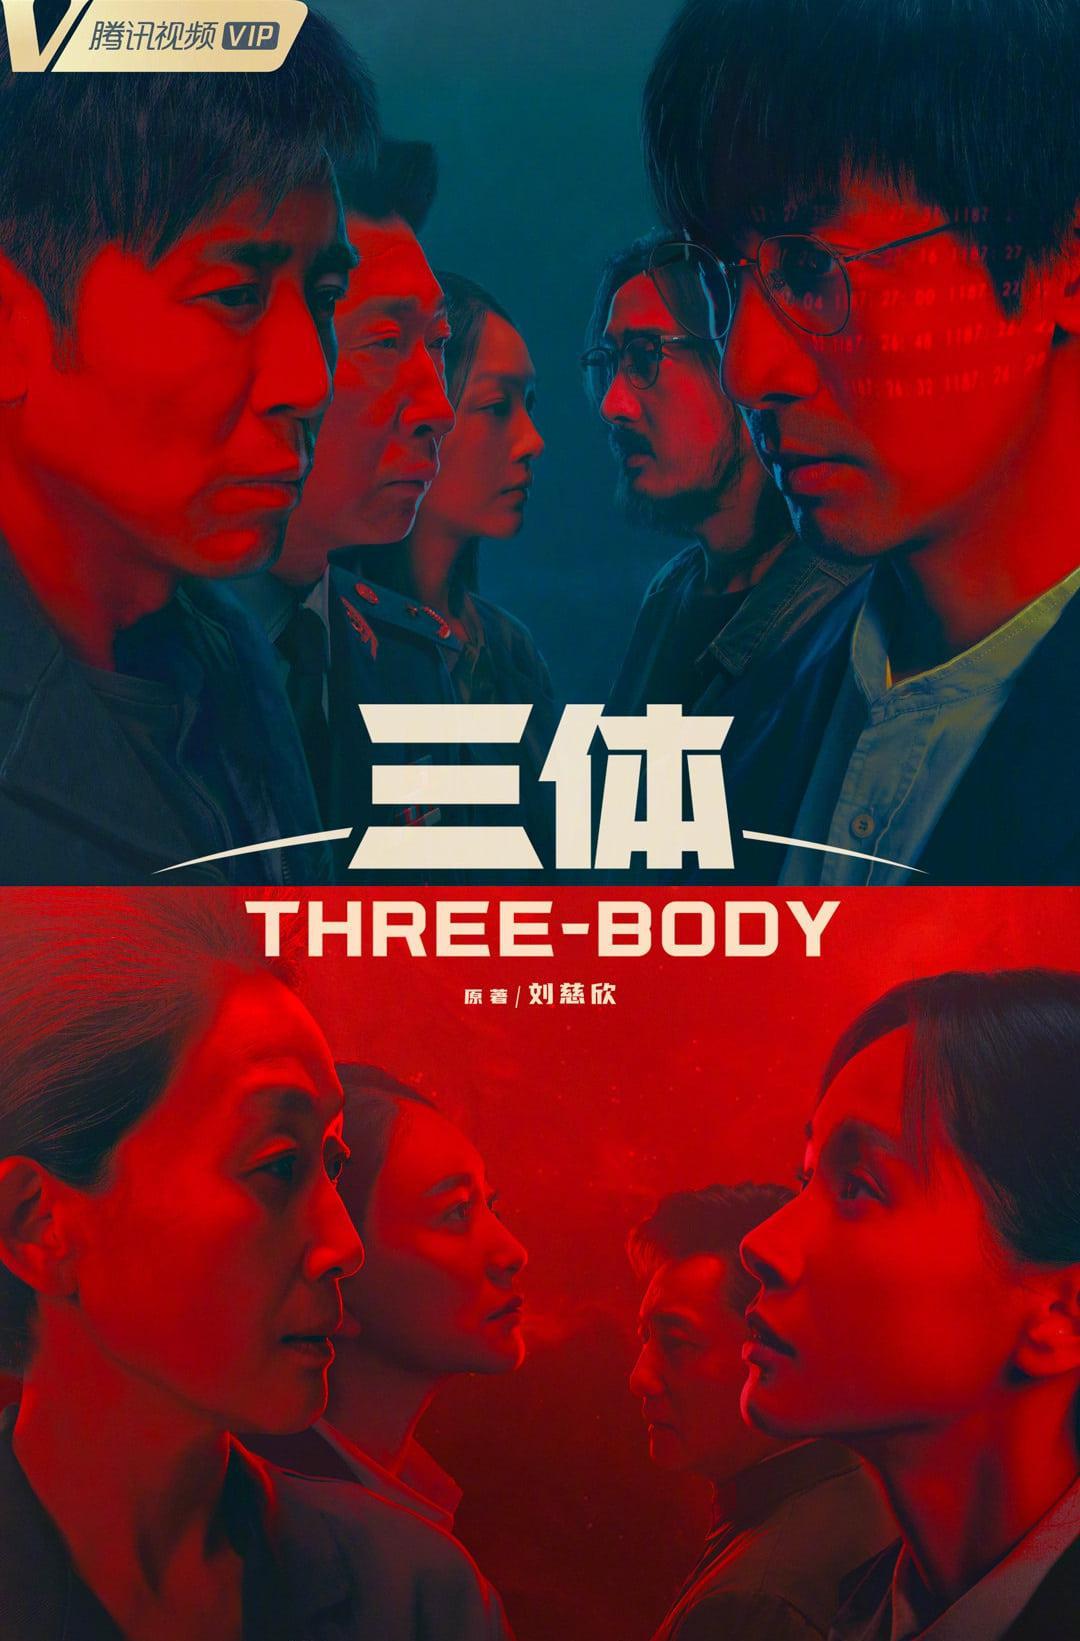 TV ratings for Three-Body (三体) in New Zealand. Tencent Video TV series